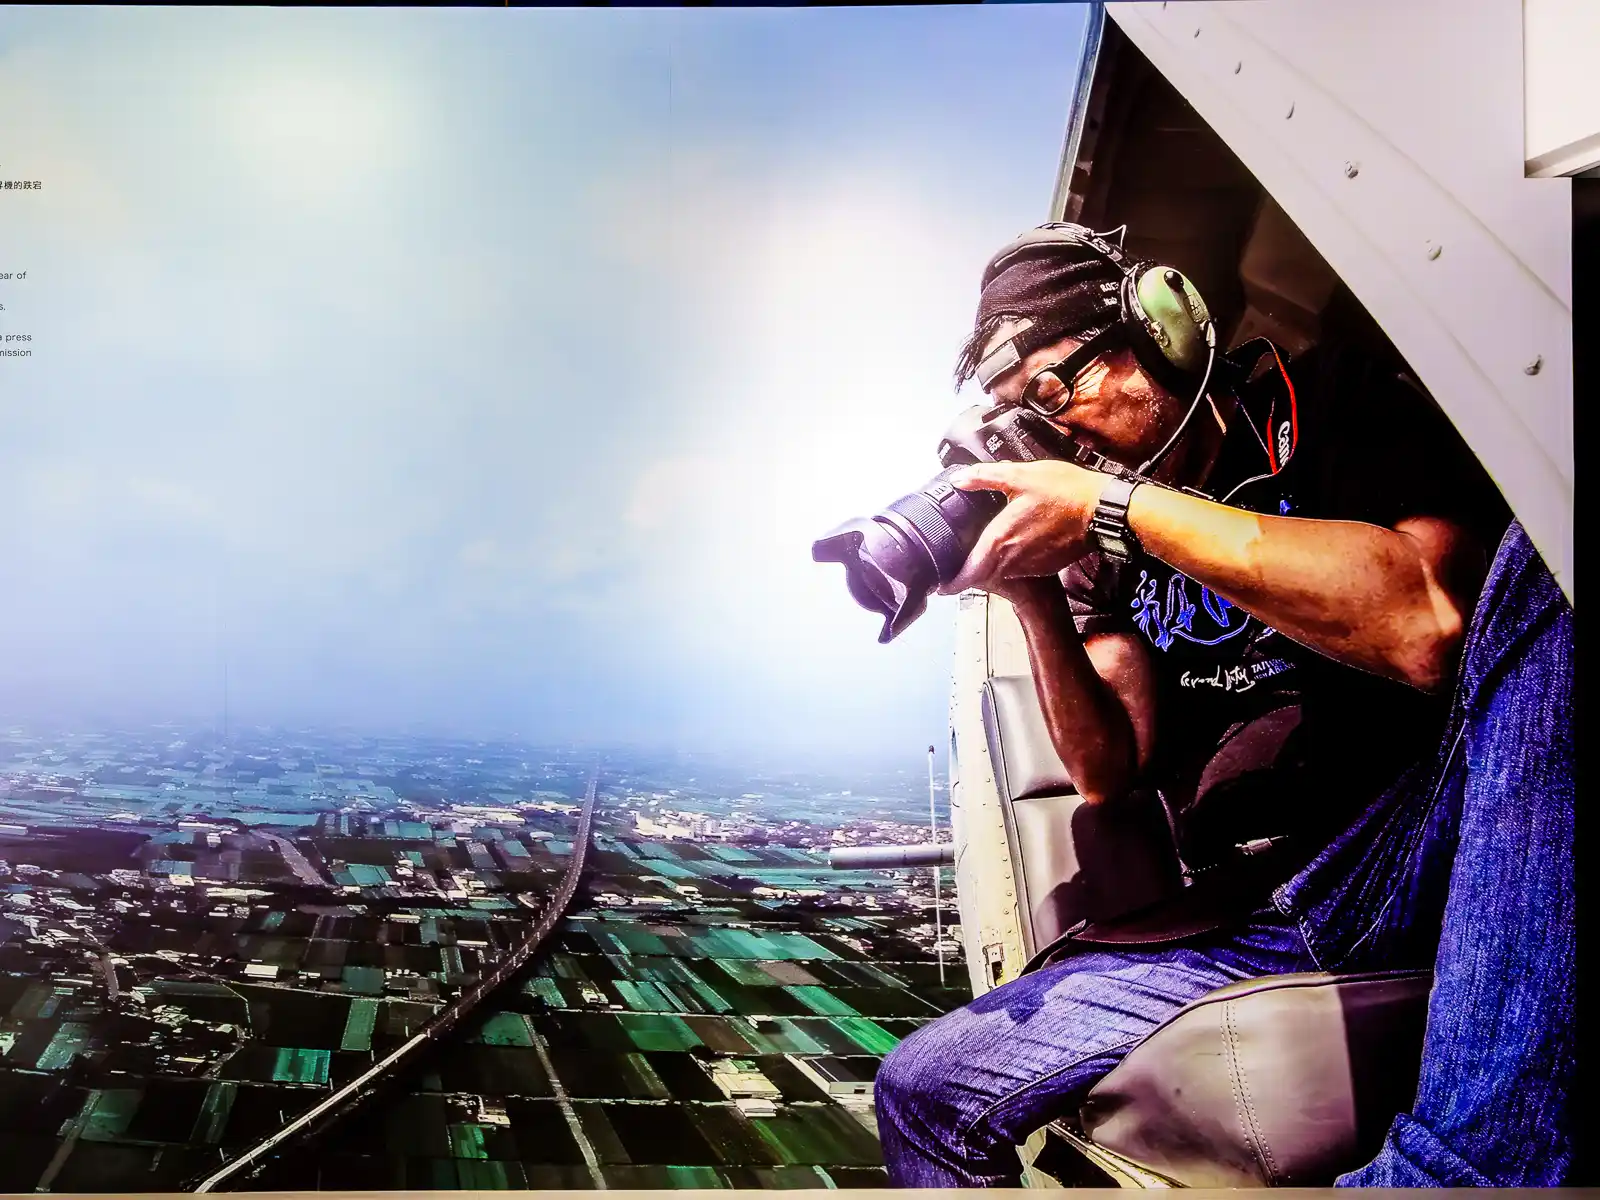 A portrait of Chi Po-lin as he takes a photograph from a helicopter door.